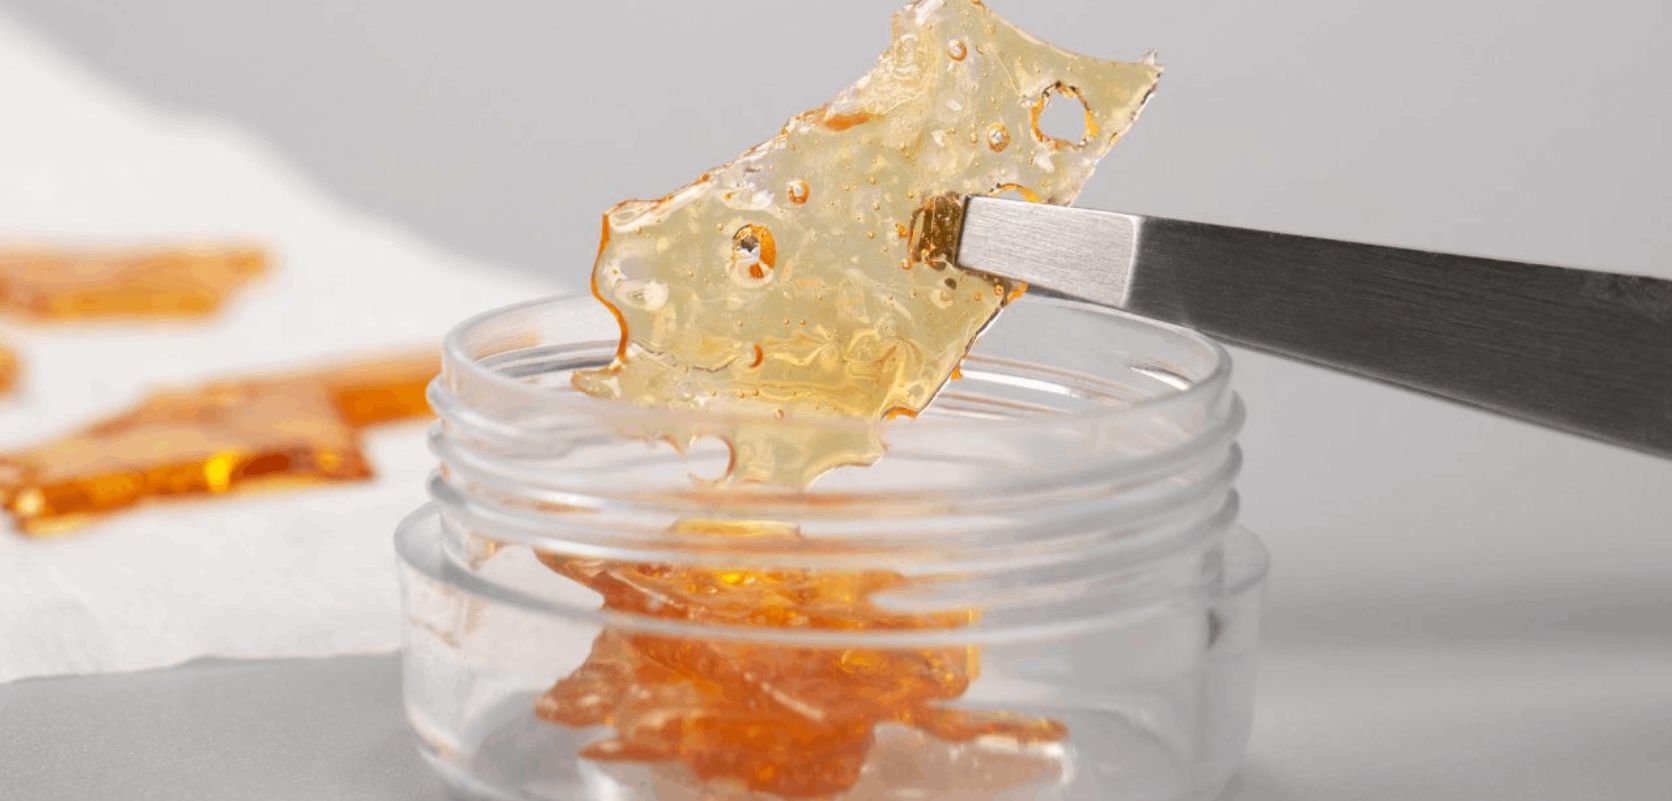 Now that you’ve learned how to use shatter, remember to start with small doses, experiment with temperatures, and prioritize safety when using shatter. 